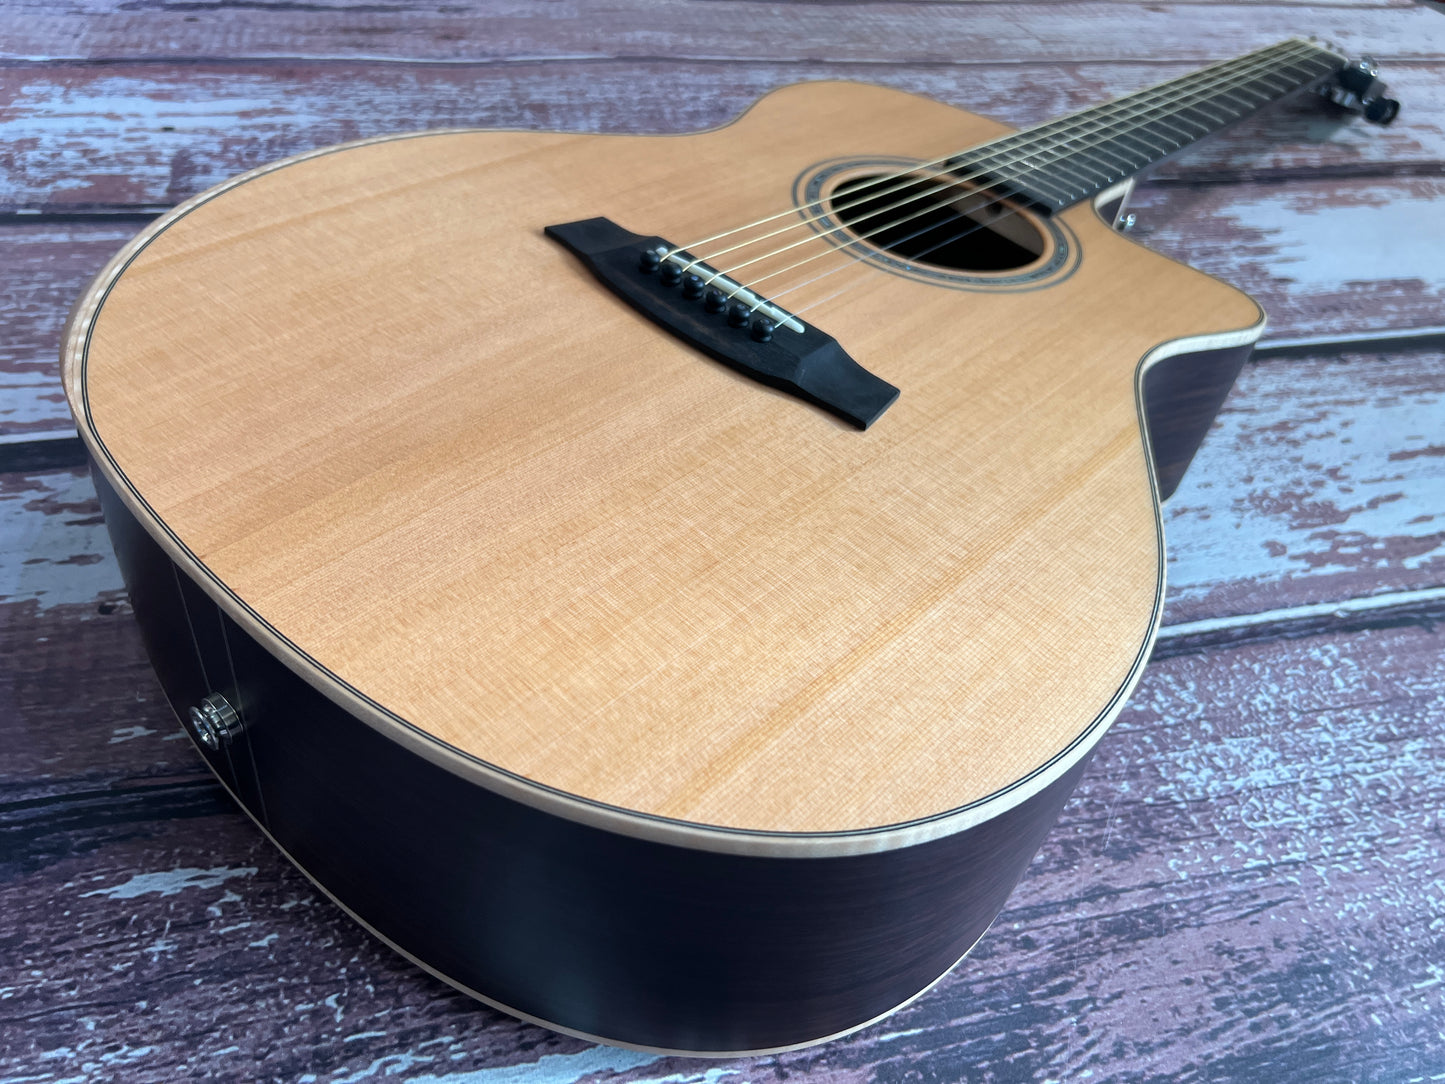 Walden G3030 RCE Electro Acoustic with Hard case 44mm nut